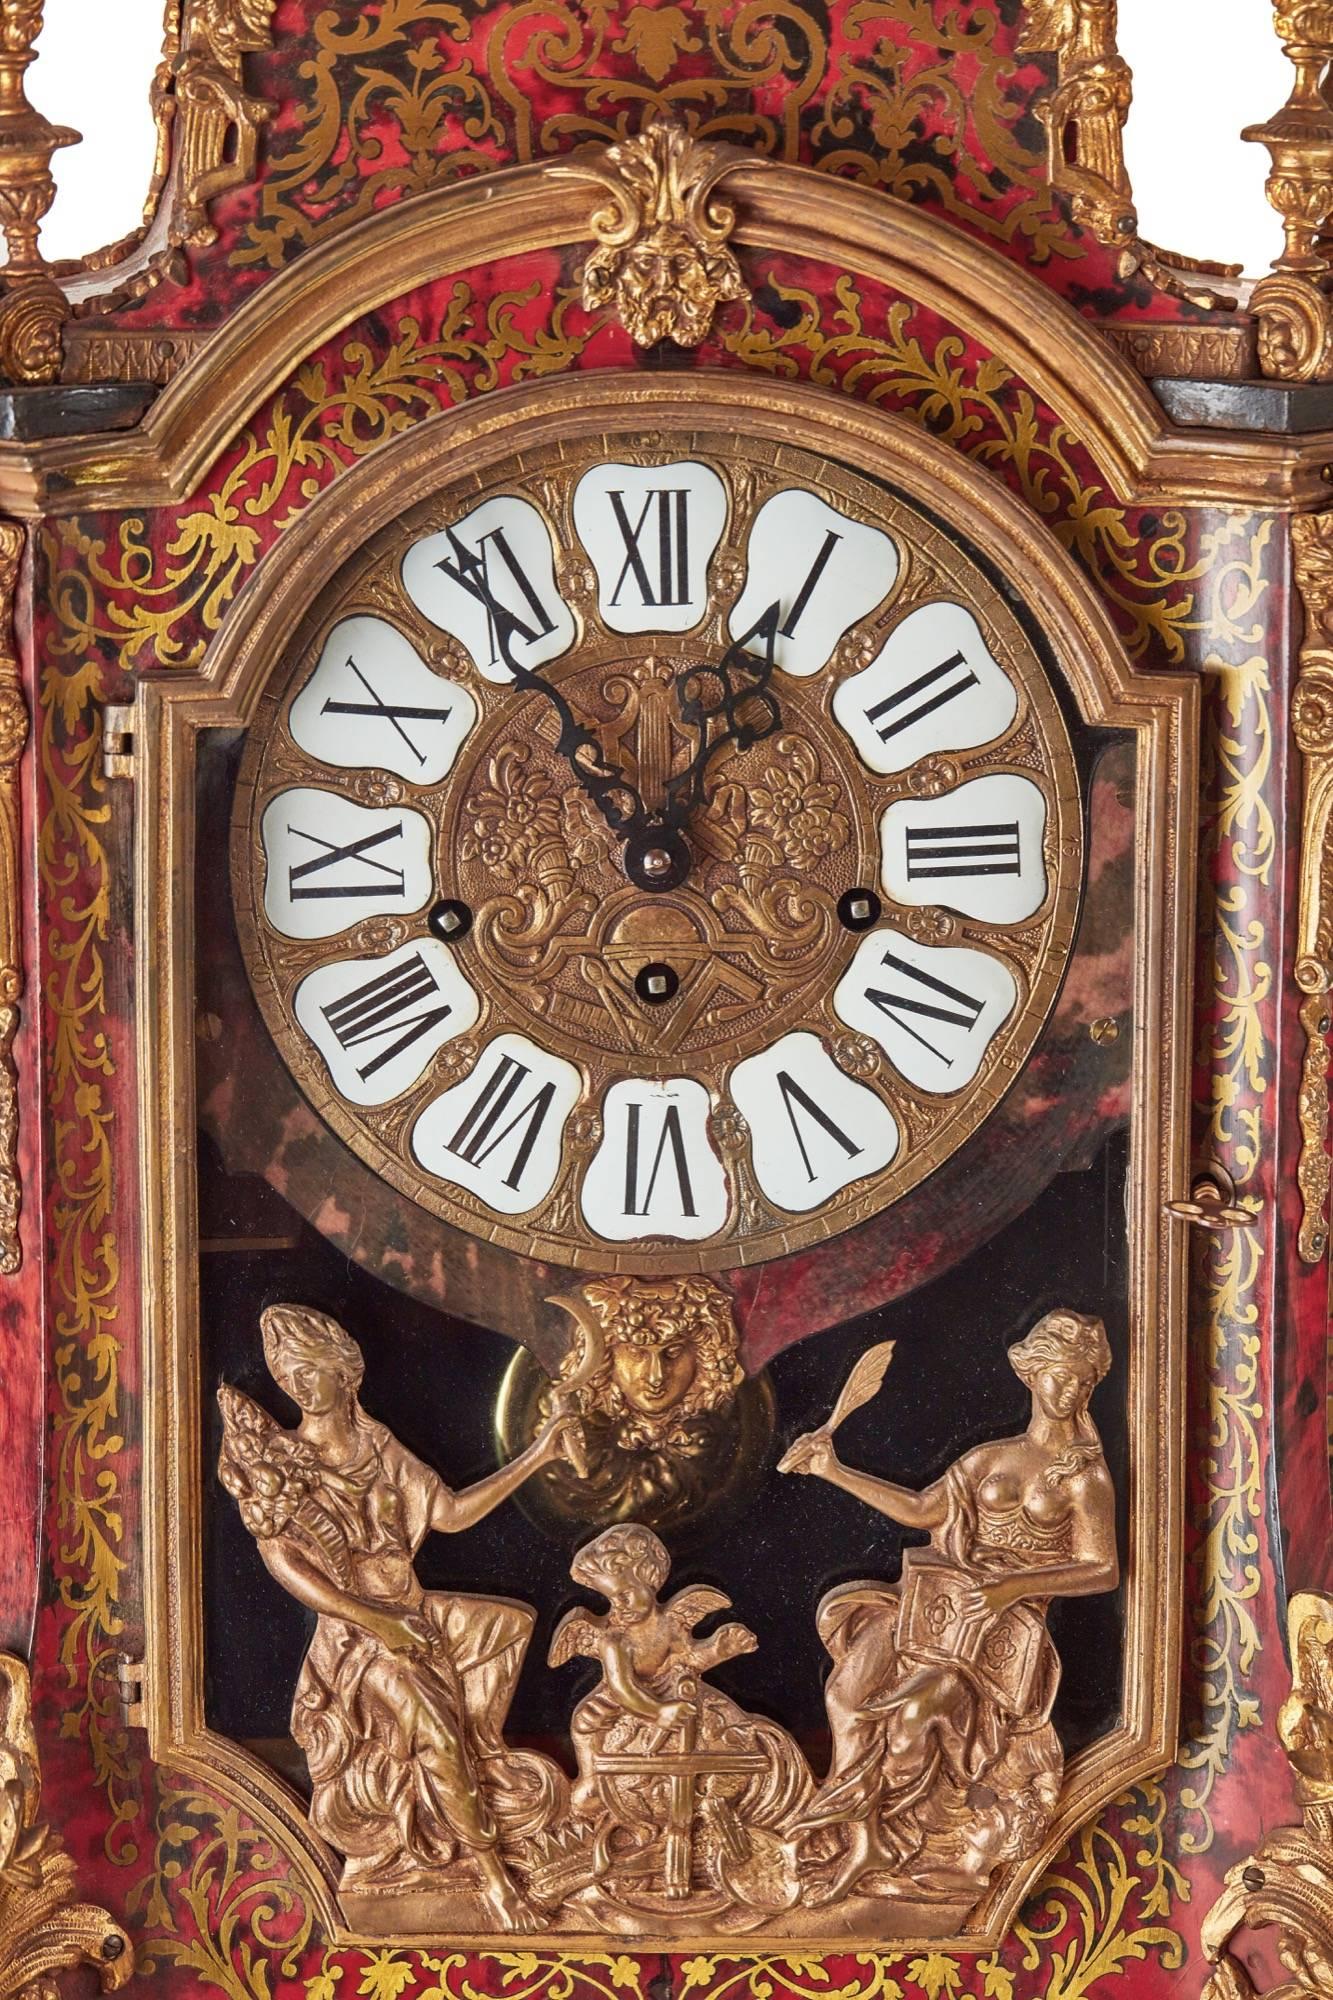 A fine French boulle clock on a boulle consul table, the top having an ormolu figure, with ormolu finals, red tortoiseshell with boulle inlaid work, shaped sides to the clock, enamel and brass dial with a three trained movement, supported by four